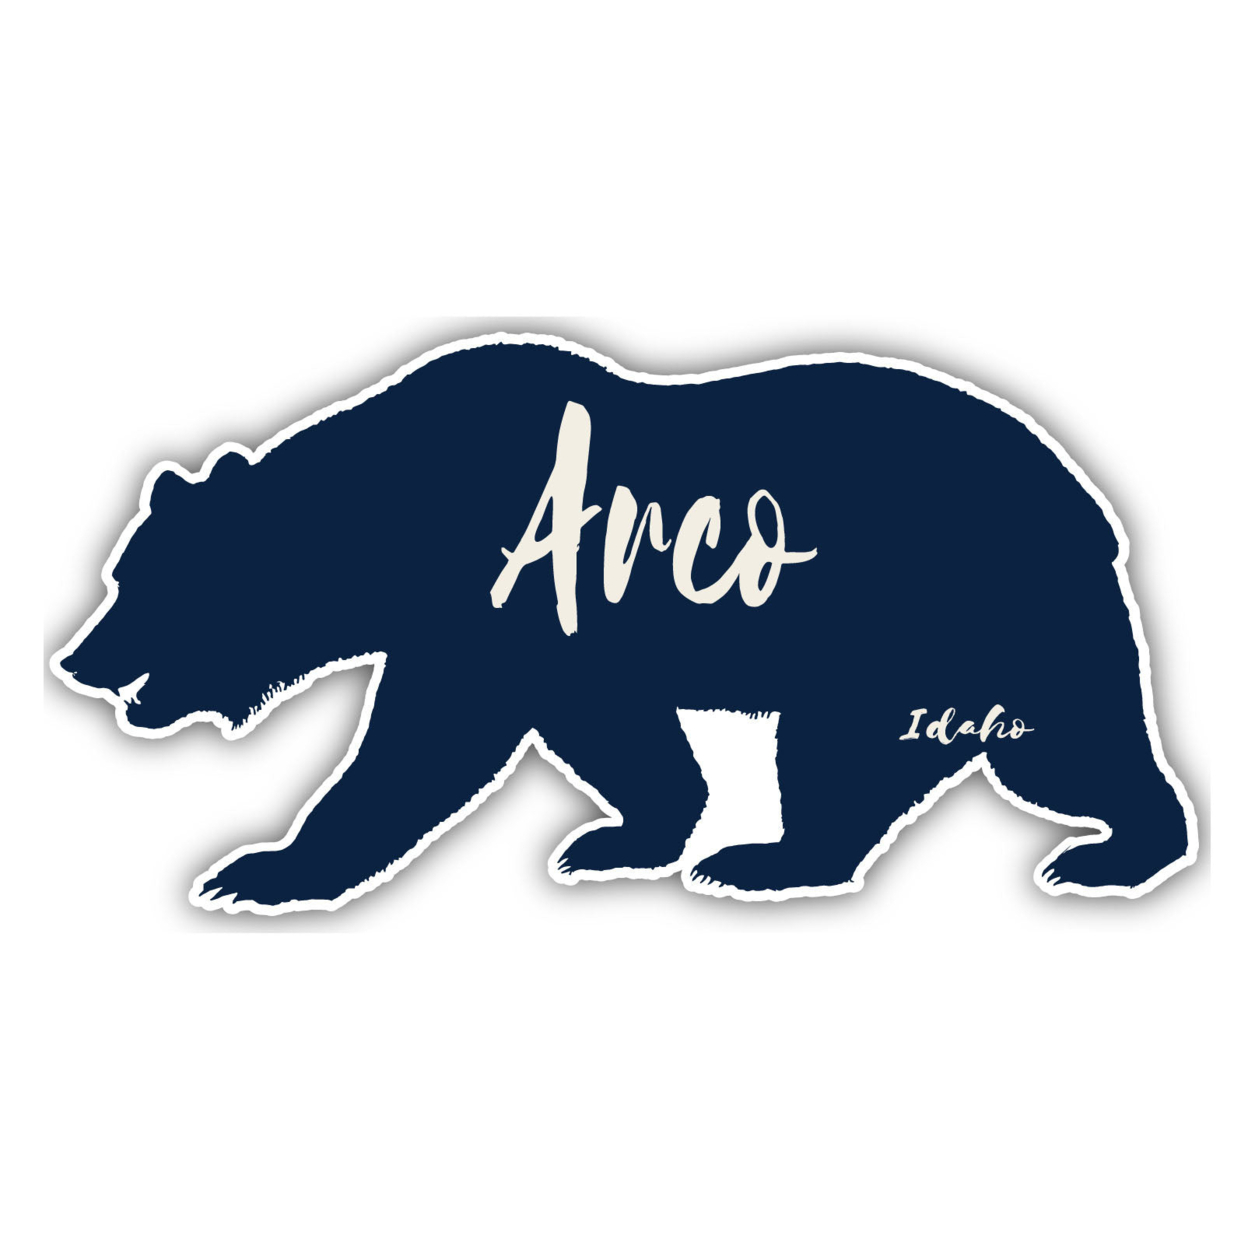 Arco Idaho Souvenir Decorative Stickers (Choose Theme And Size) - 4-Pack, 4-Inch, Great Outdoors